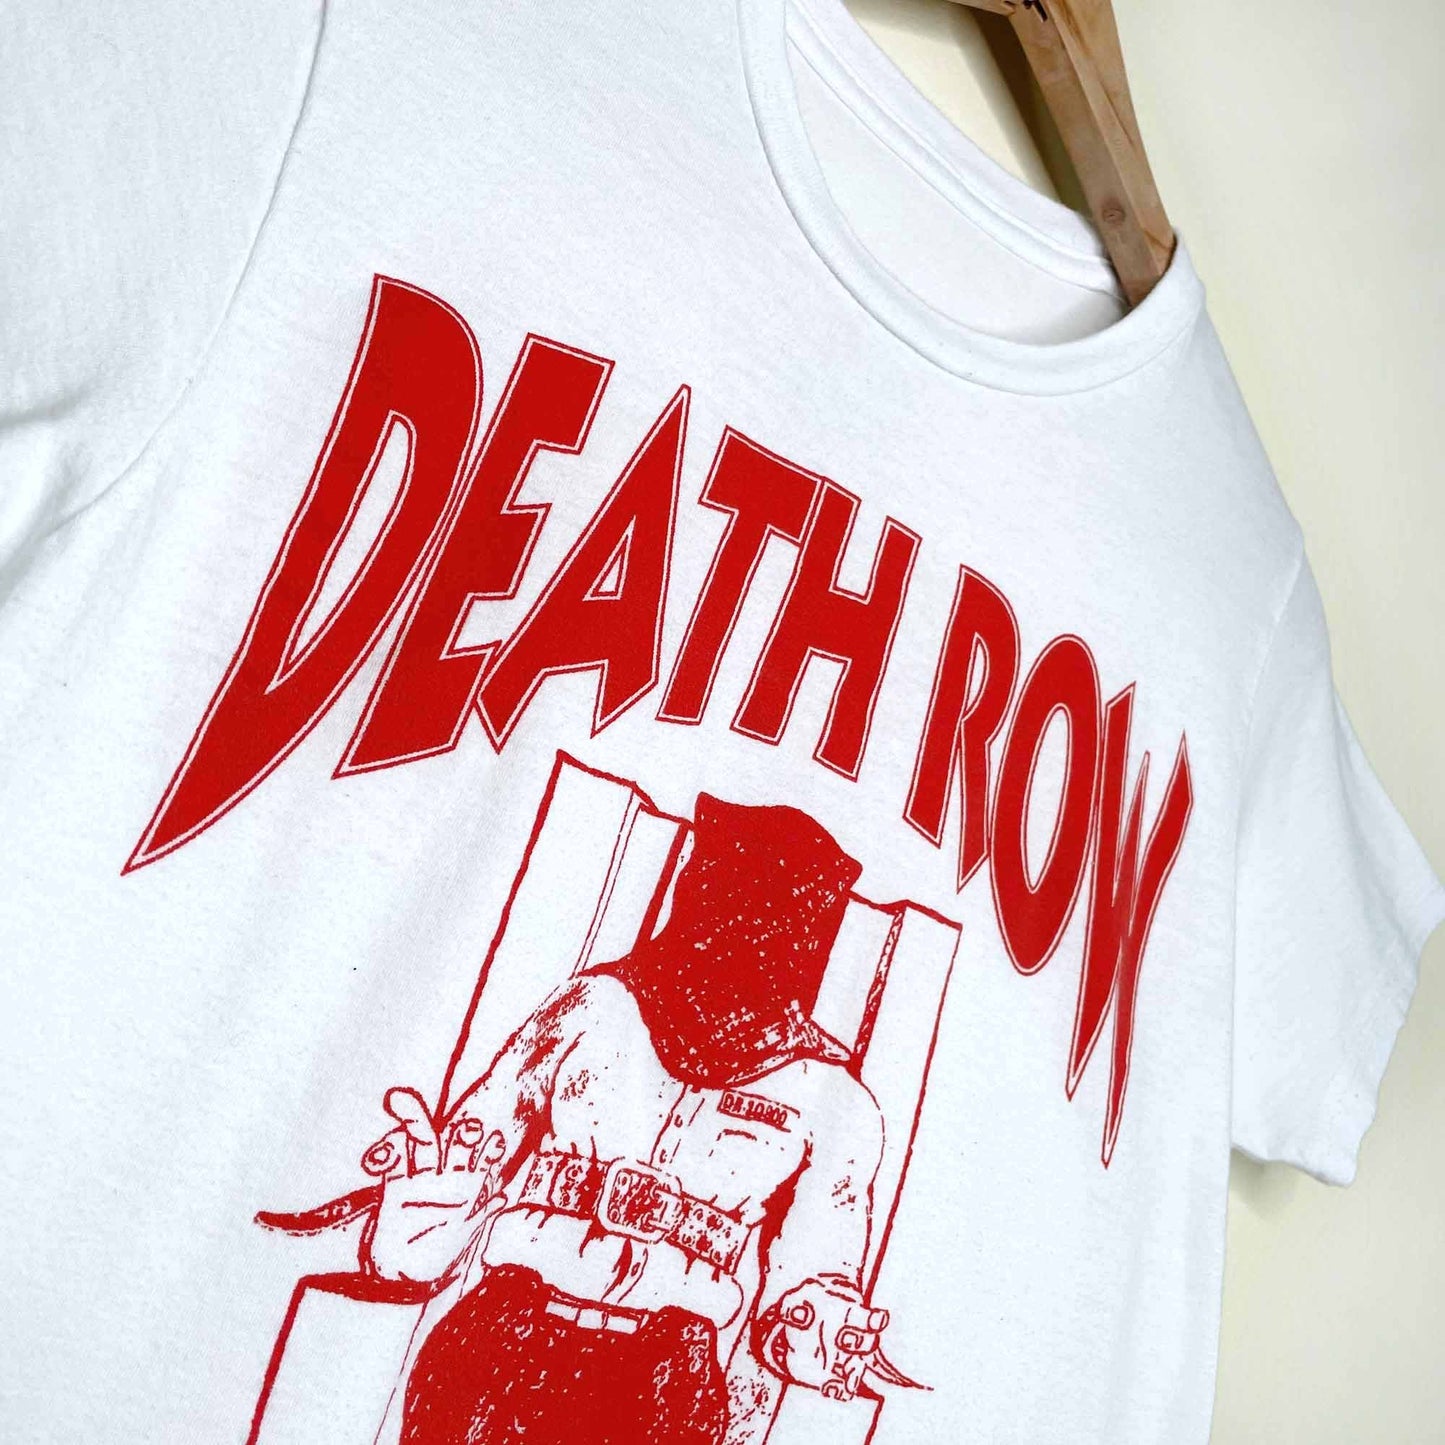 death row records graphic tee - size small